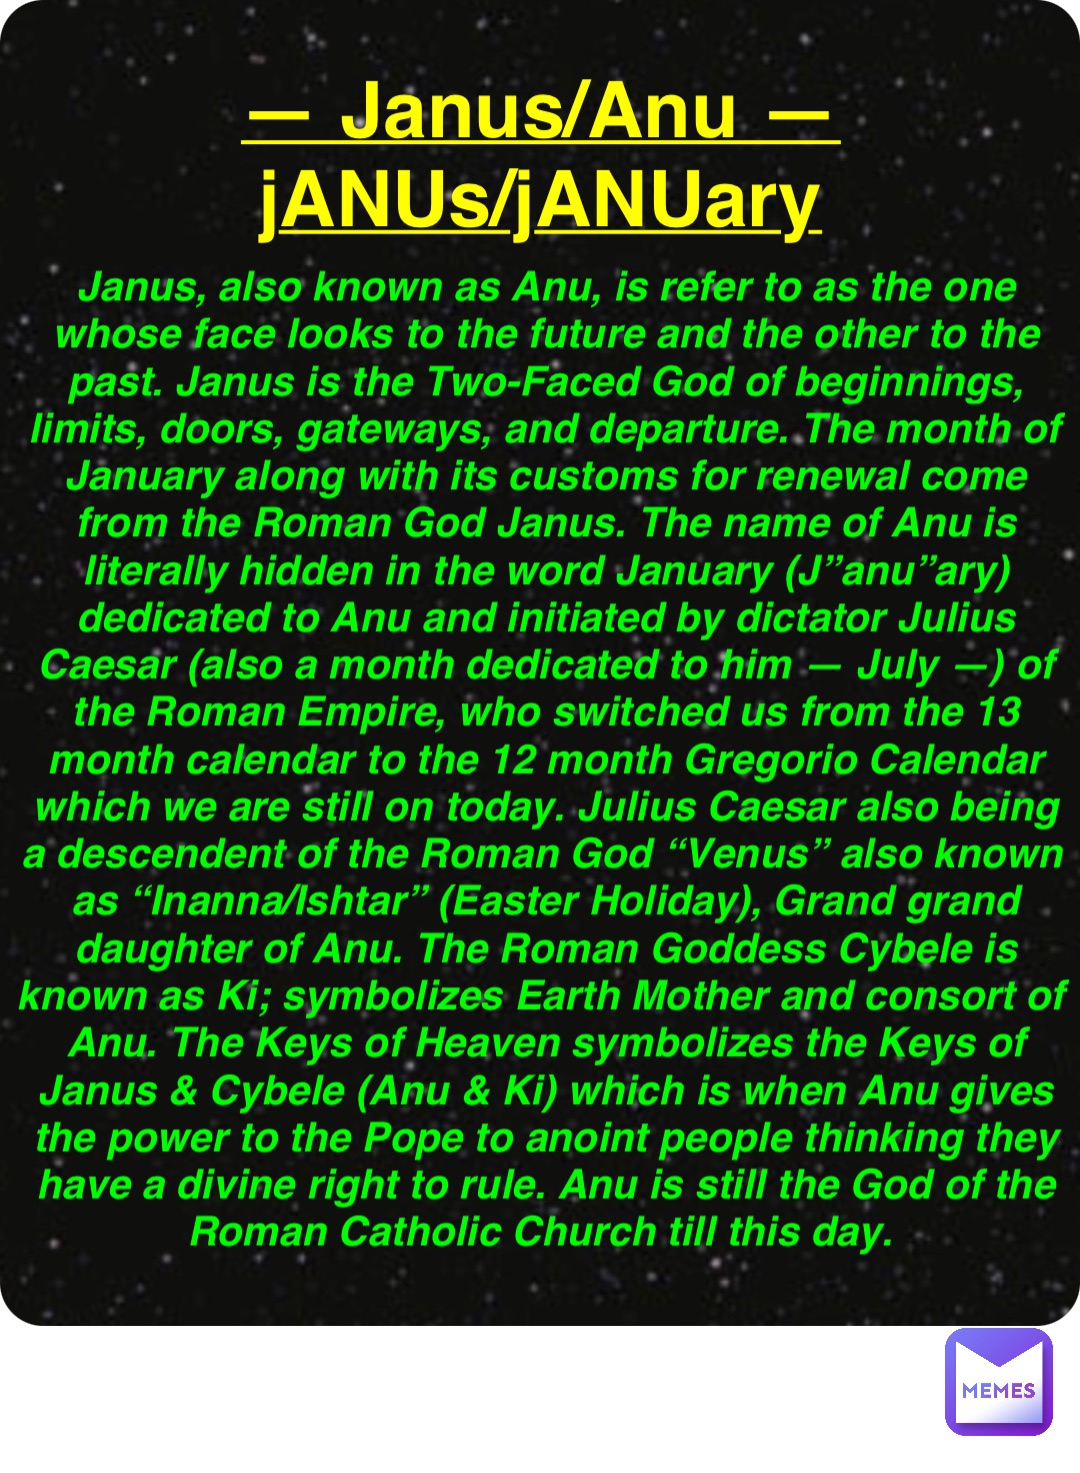 Double tap to edit — Janus/Anu —
jANUs/jANUary Janus, also known as Anu, is refer to as the one whose face looks to the future and the other to the past. Janus is the Two-Faced God of beginnings, limits, doors, gateways, and departure. The month of January along with its customs for renewal come from the Roman God Janus. The name of Anu is literally hidden in the word January (J”anu”ary) dedicated to Anu and initiated by dictator Julius Caesar (also a month dedicated to him — July —) of the Roman Empire, who switched us from the 13 month calendar to the 12 month Gregorio Calendar which we are still on today. Julius Caesar also being a descendent of the Roman God “Venus” also known as “Inanna/Ishtar” (Easter Holiday), Grand grand daughter of Anu. The Roman Goddess Cybele is known as Ki; symbolizes Earth Mother and consort of Anu. The Keys of Heaven symbolizes the Keys of Janus & Cybele (Anu & Ki) which is when Anu gives the power to the Pope to anoint people thinking they have a divine right to rule. Anu is still the God of the Roman Catholic Church till this day.